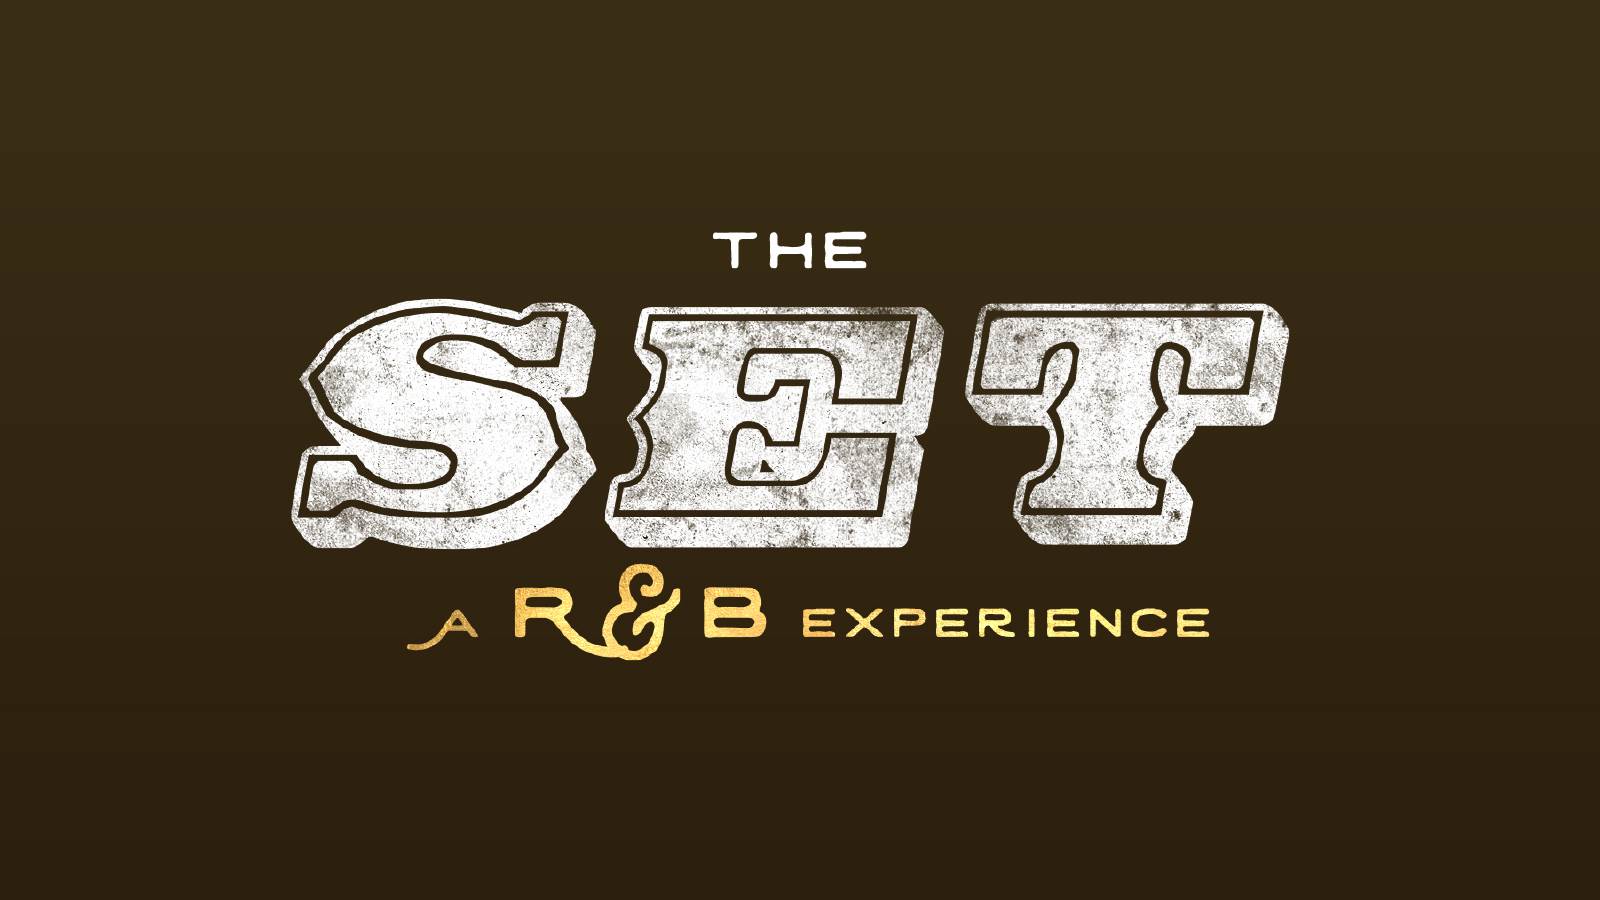 "The Set: A R&B Experience" is written on a brown background